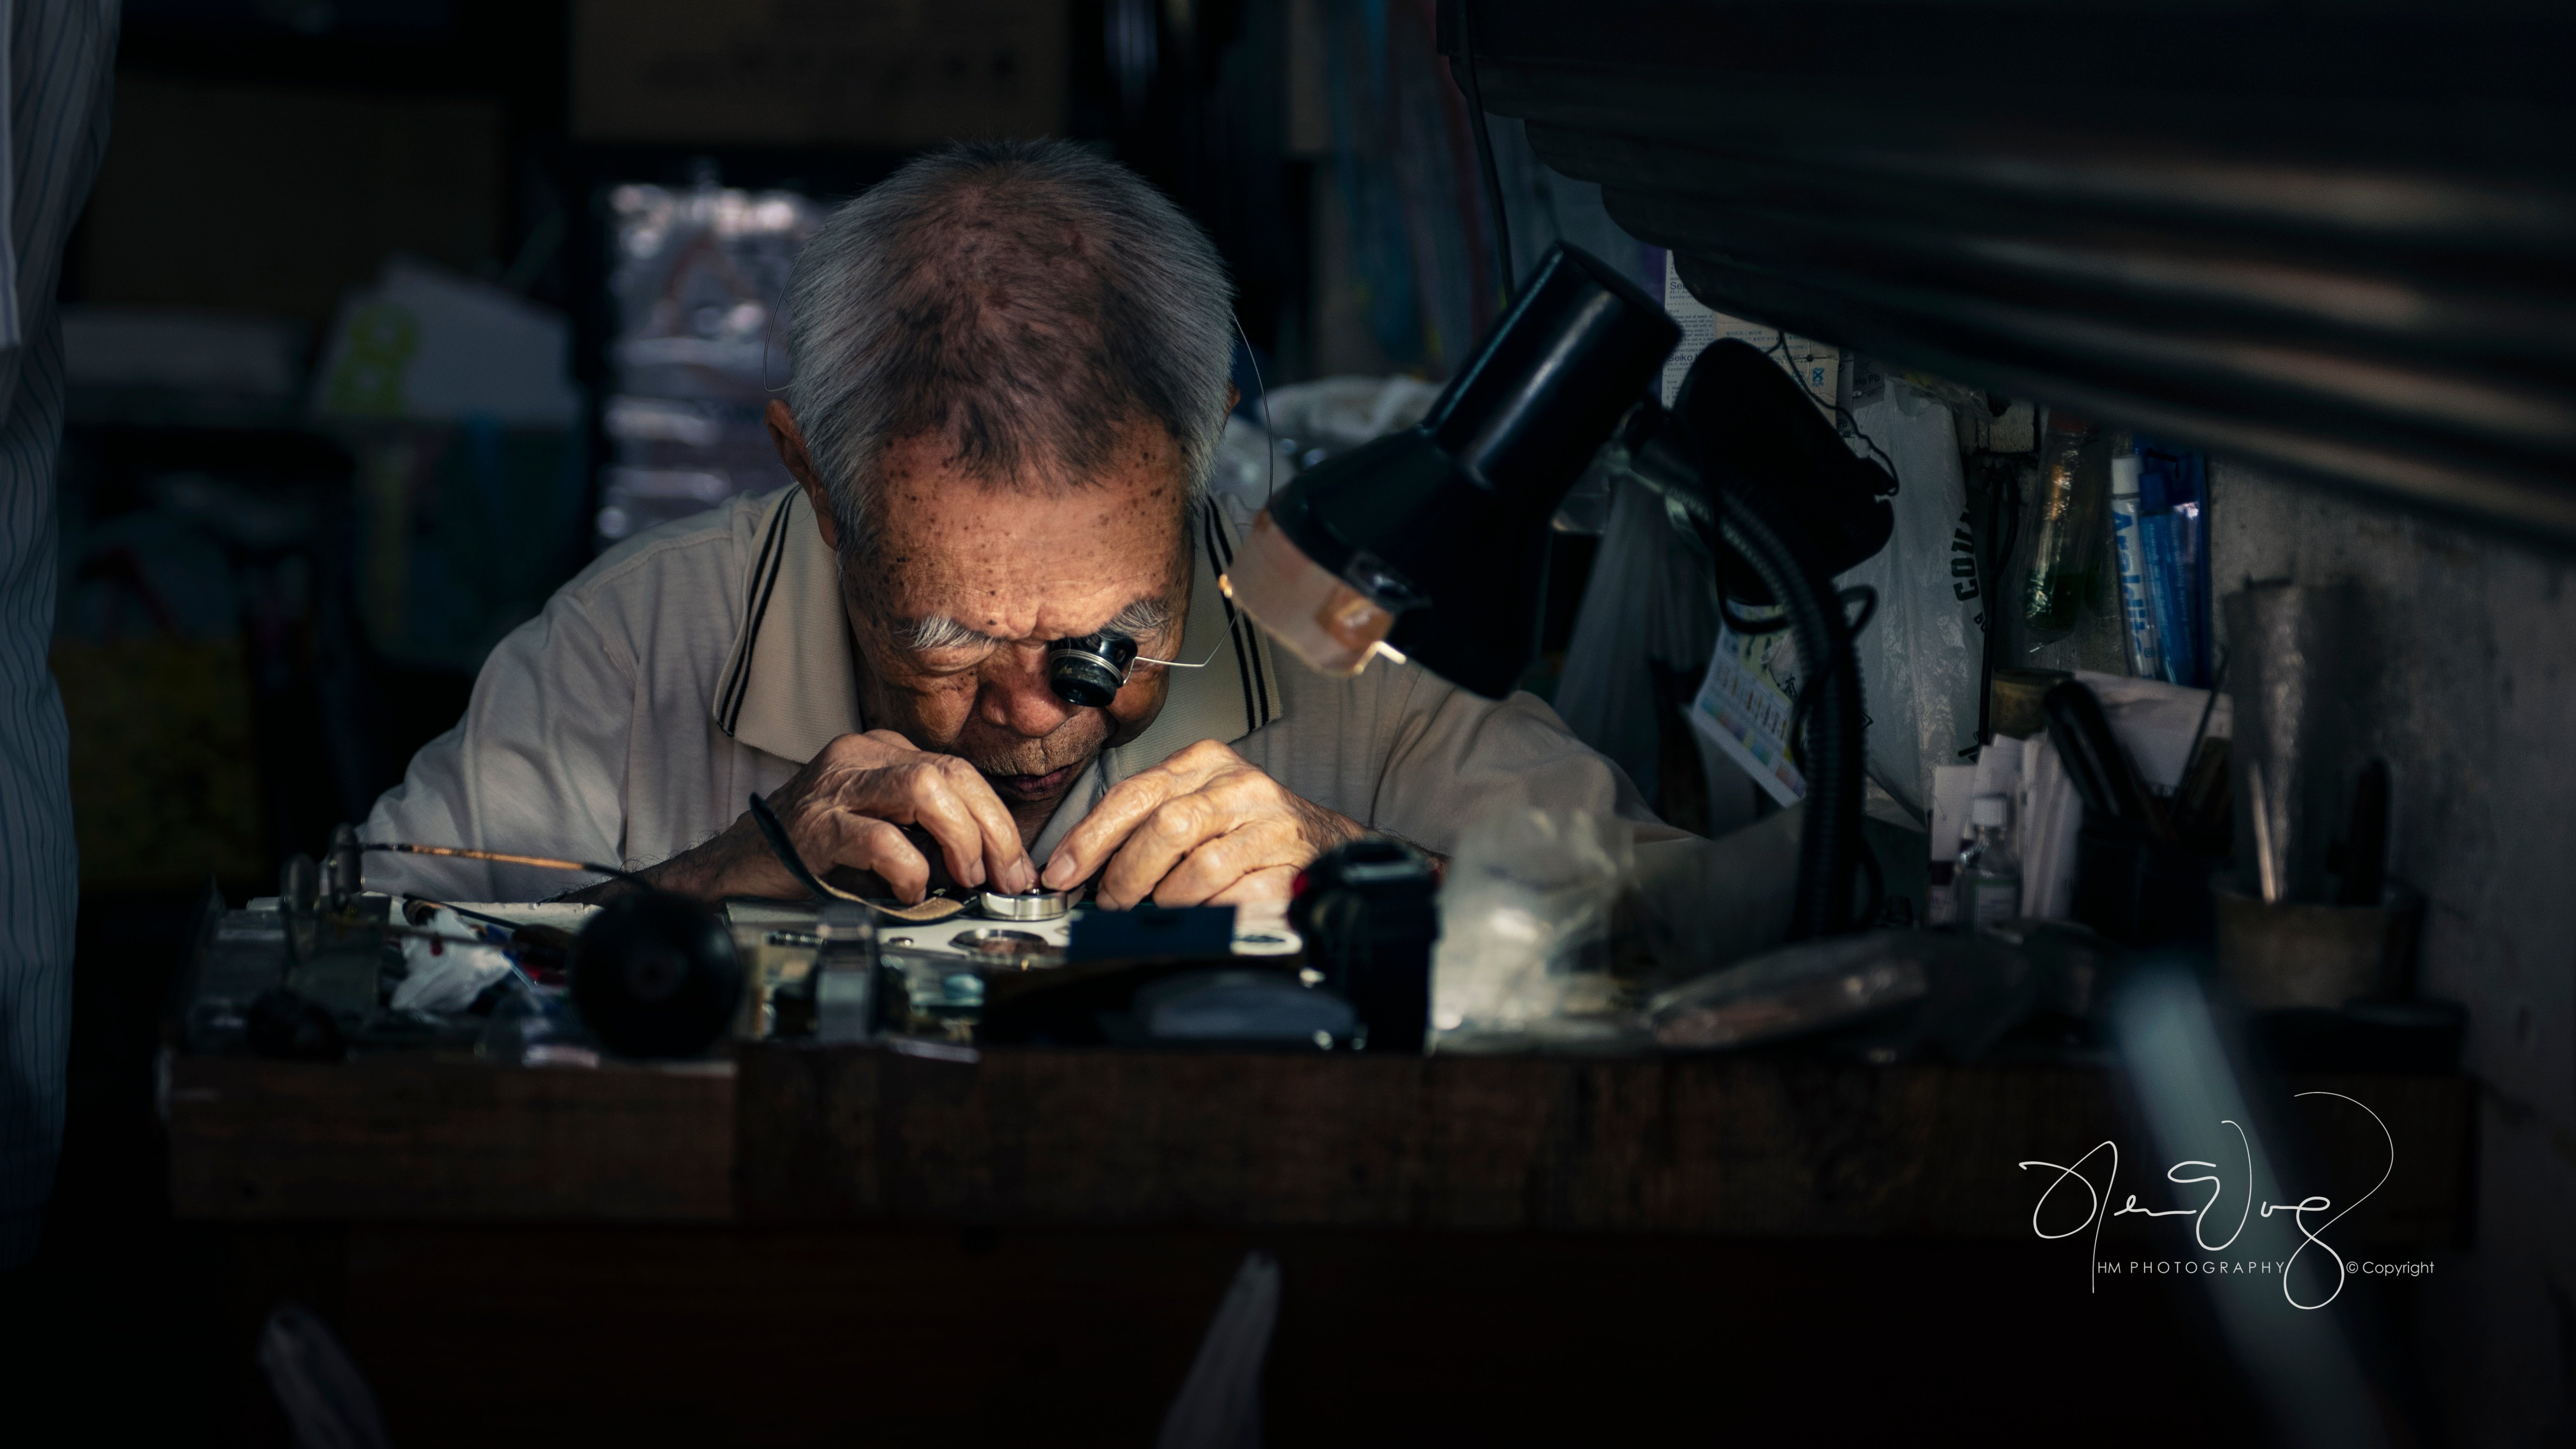 A horologist hard at work making a watch by hand